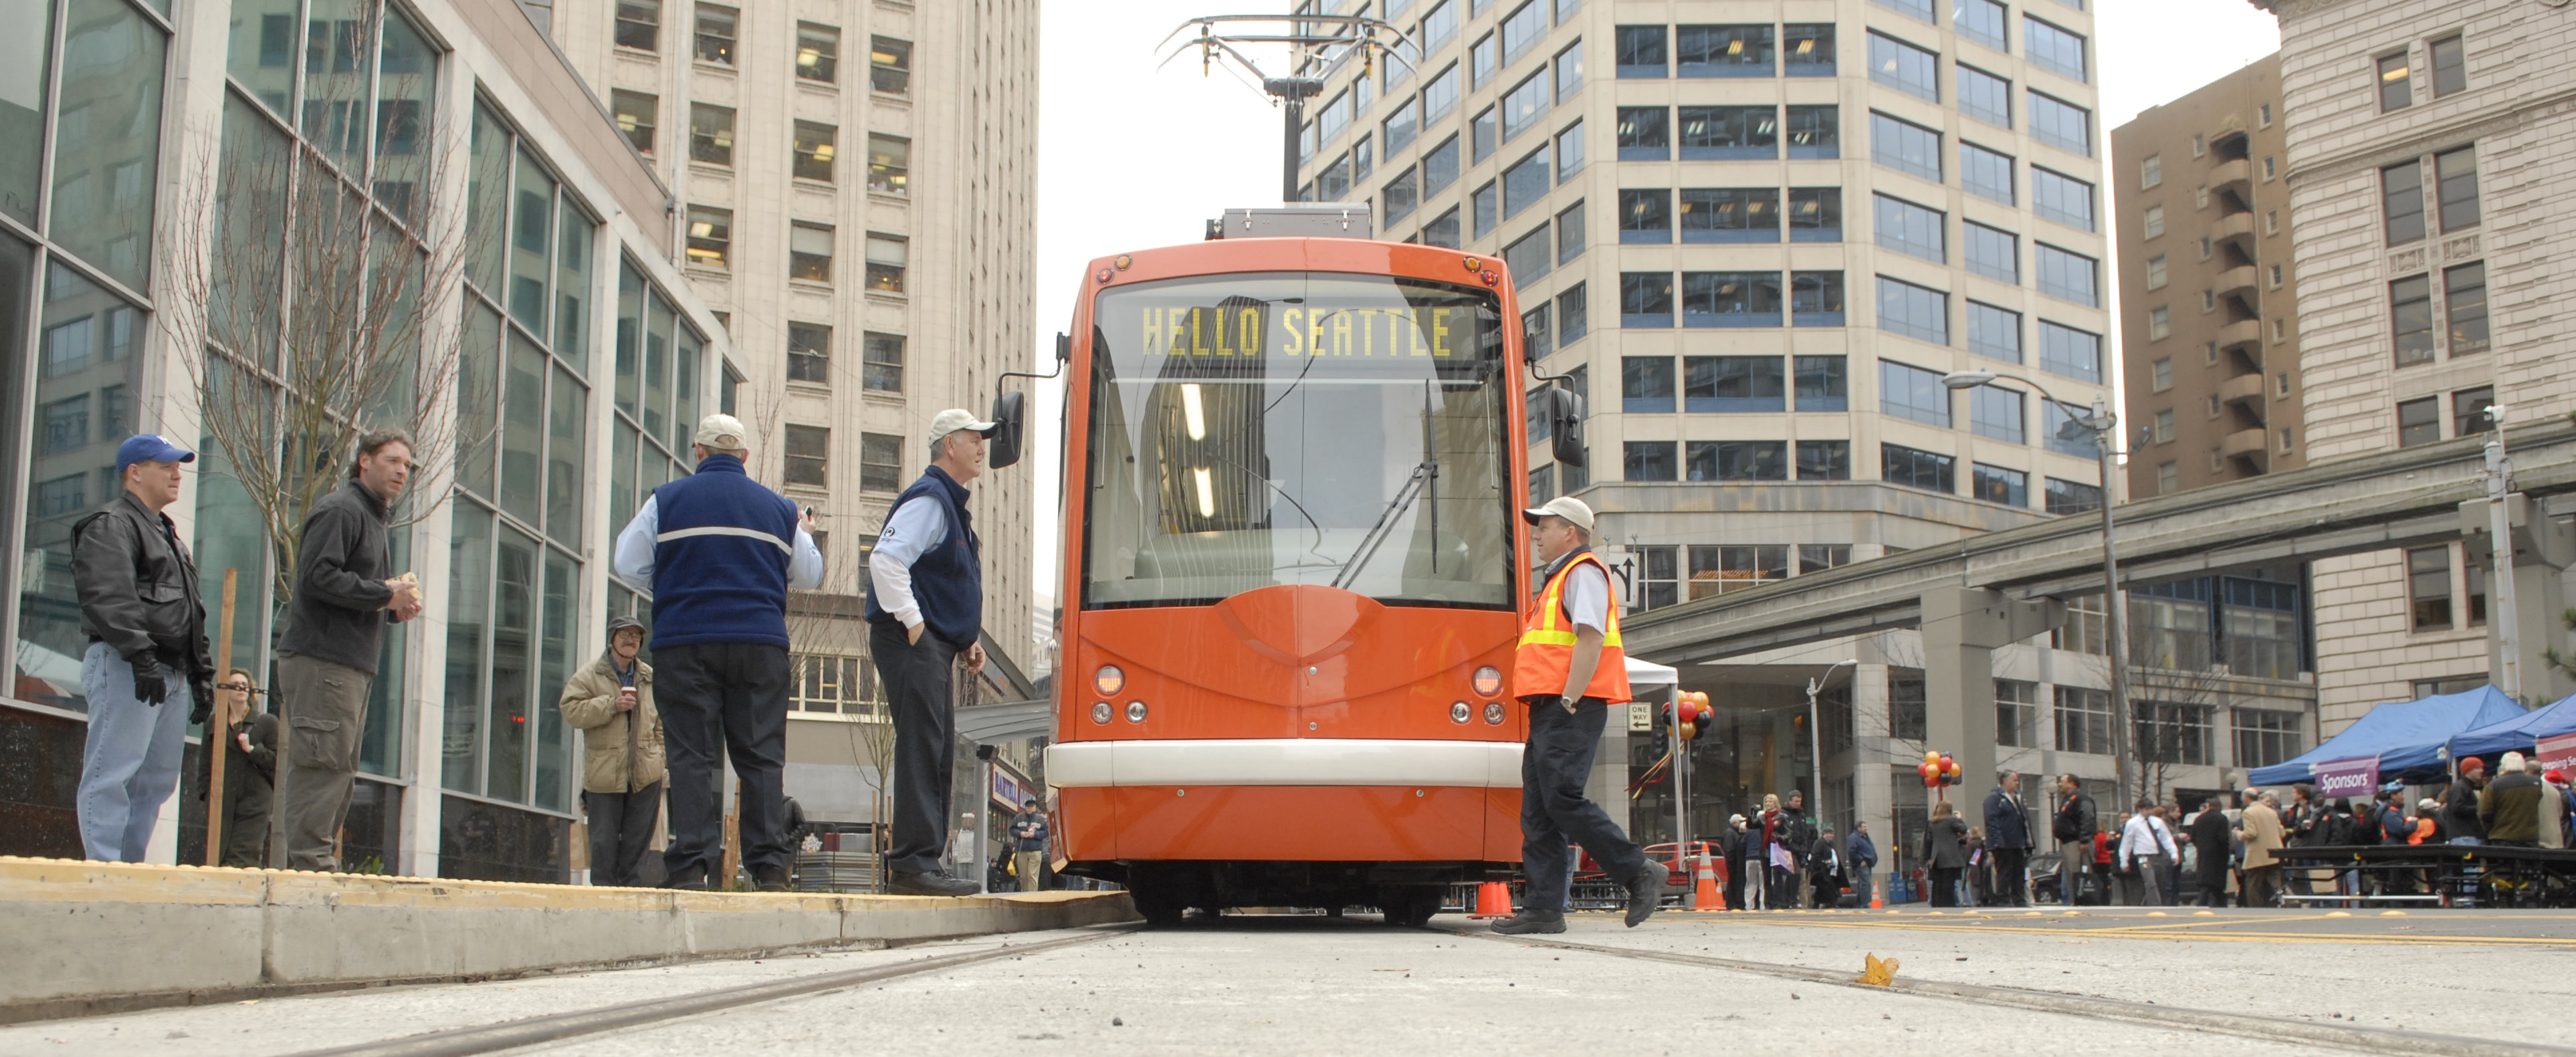 A South Lake Union streetcar is unveiled.